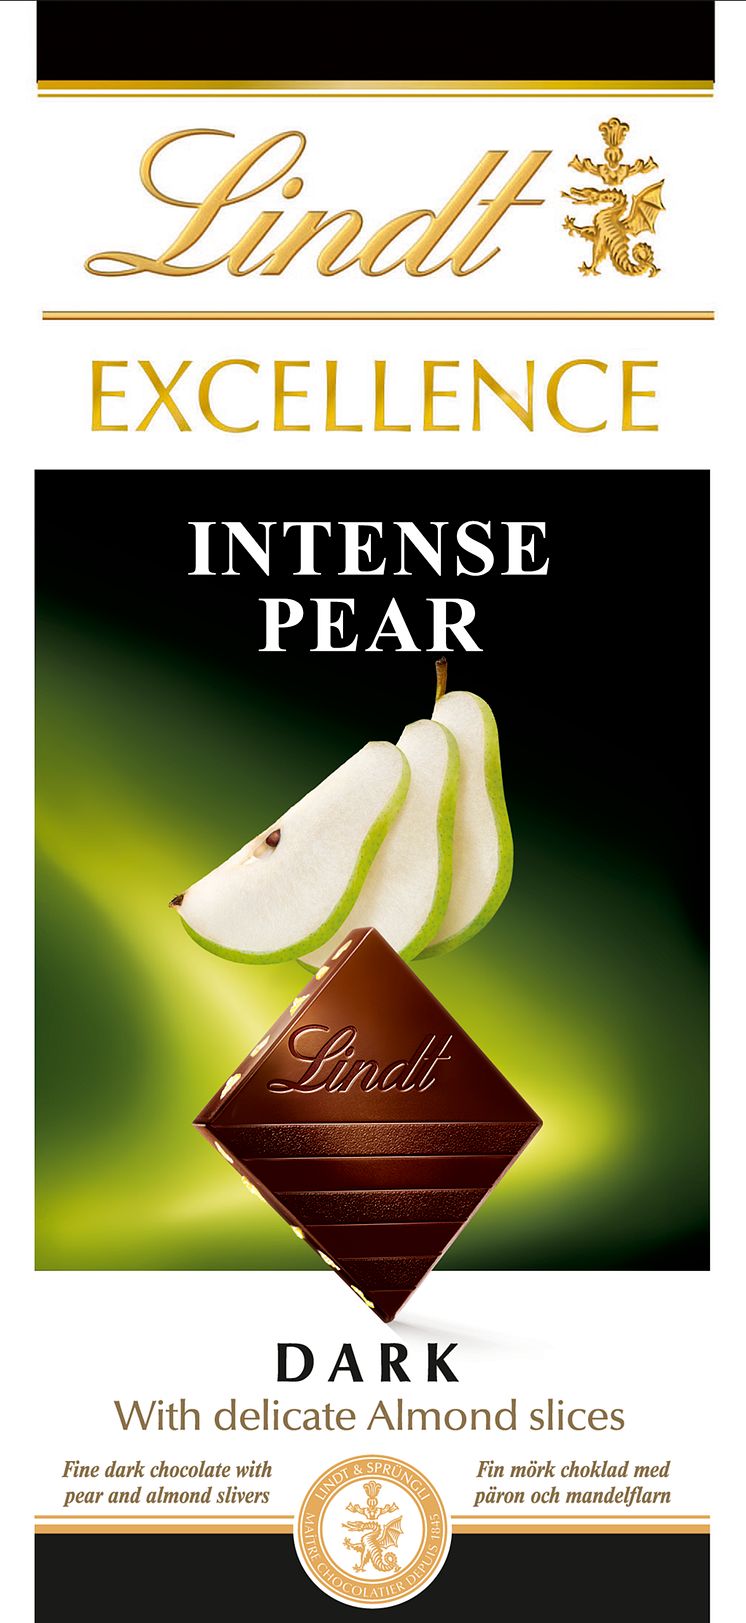 Lindt Excellence Intense Pear